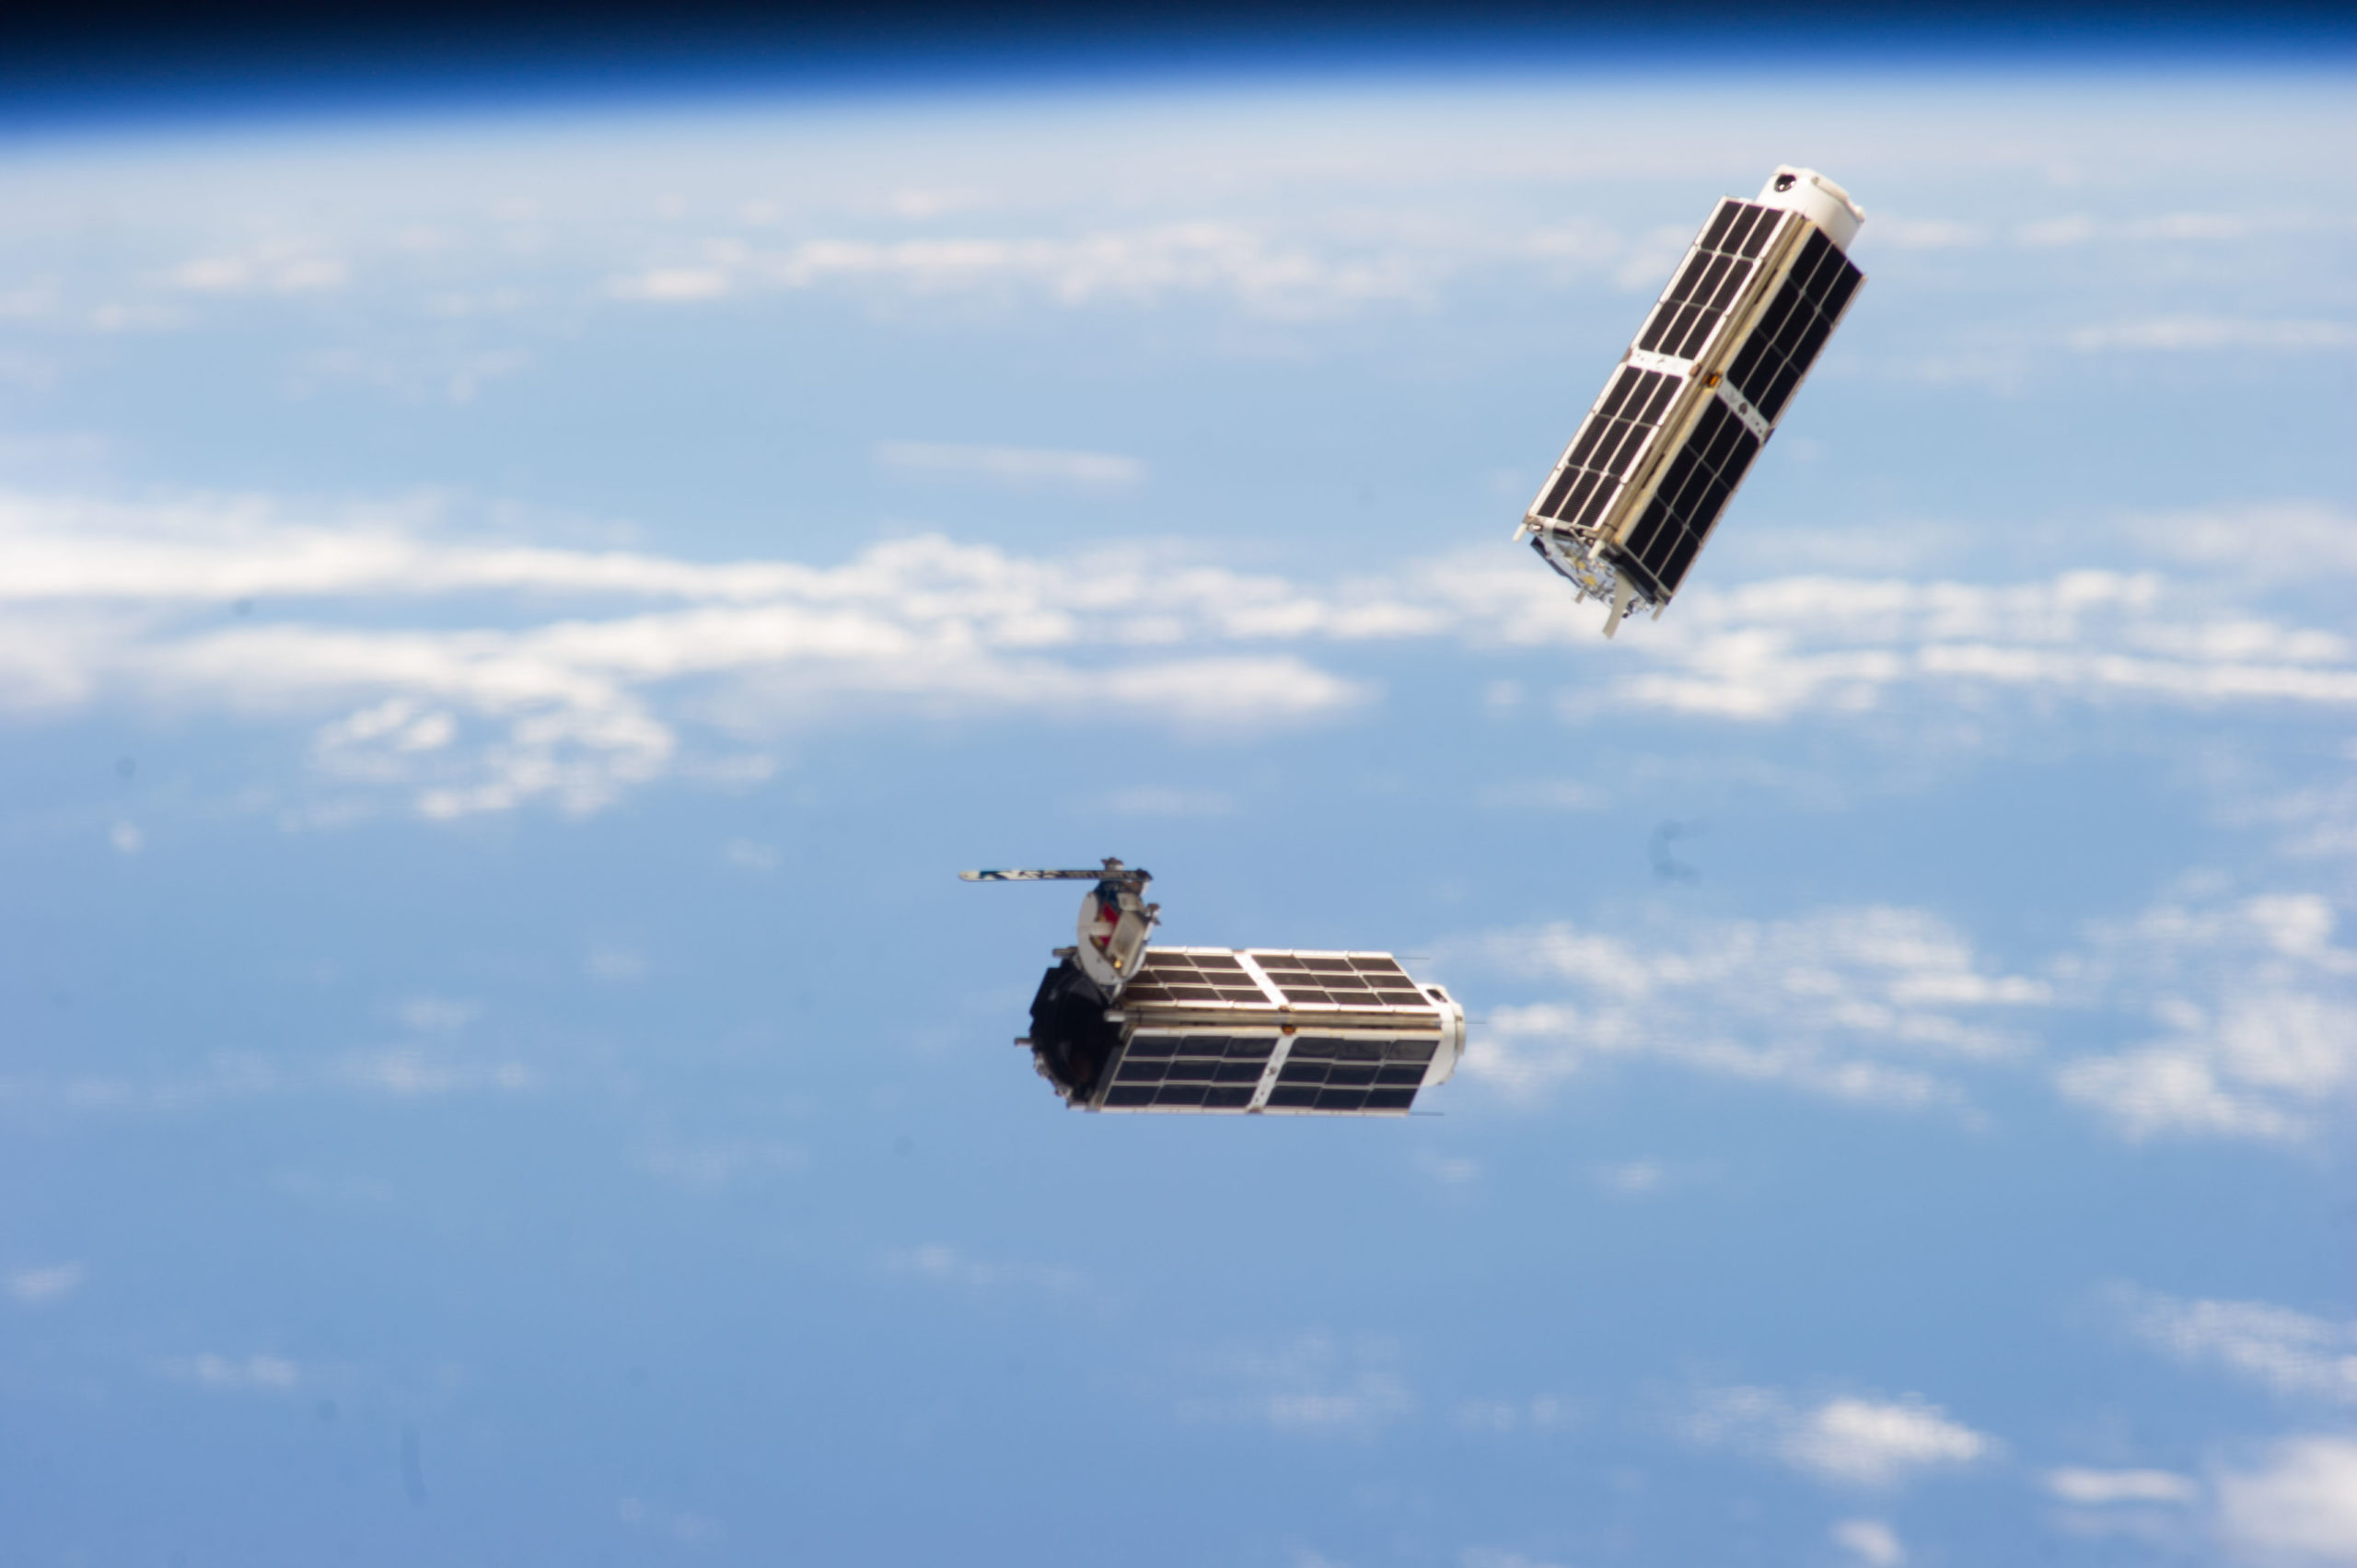 “Shortly after release, two doves float against the Earth’s horizon, still in view of the International Space Station. After deployment, the satellites go through what is called a commissioning period. Each Dove is powered on, and tests are run to confirm that all systems are functional.” Source: Planet Labs